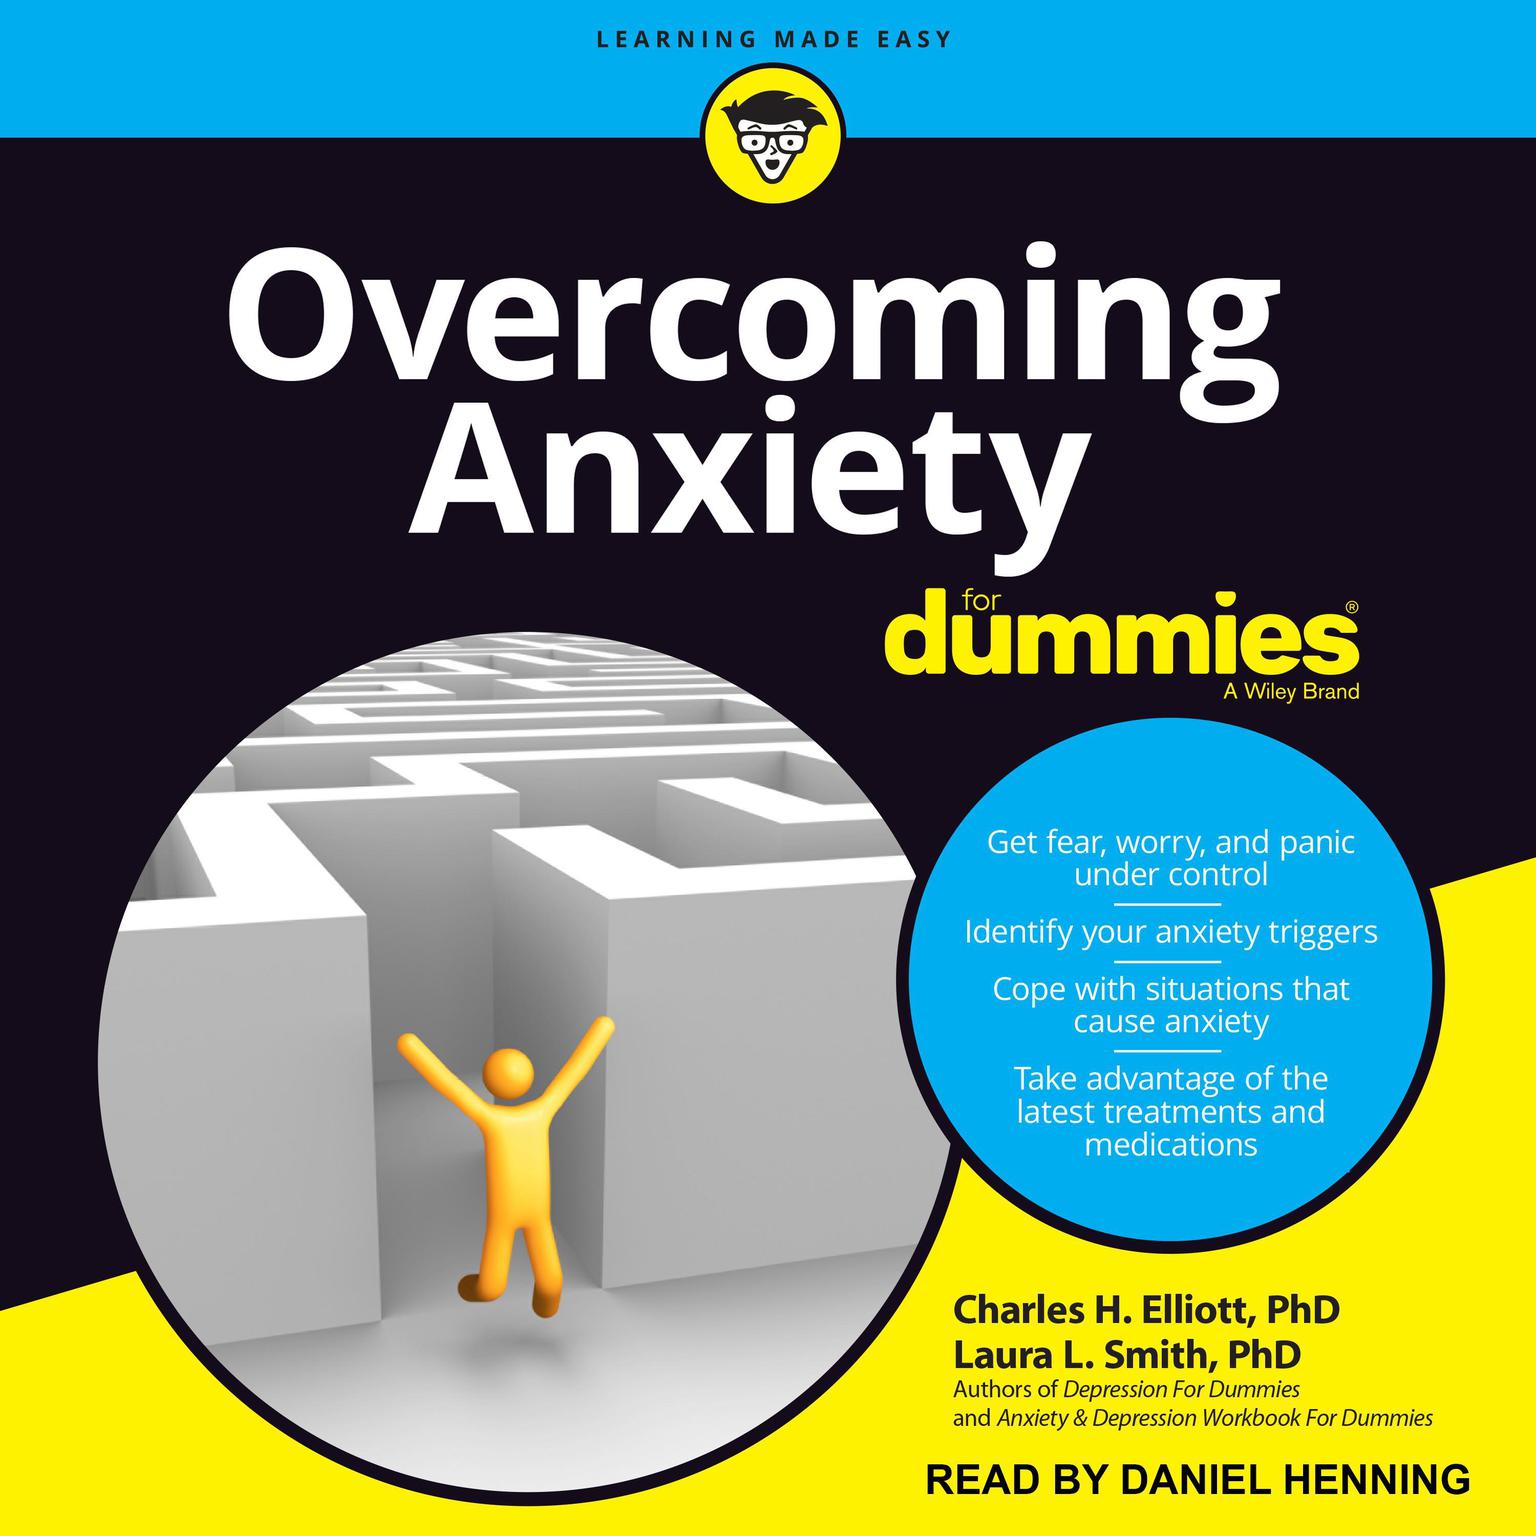 Overcoming Anxiety For Dummies: 2nd Edition Audiobook, by Charles H. Elliott